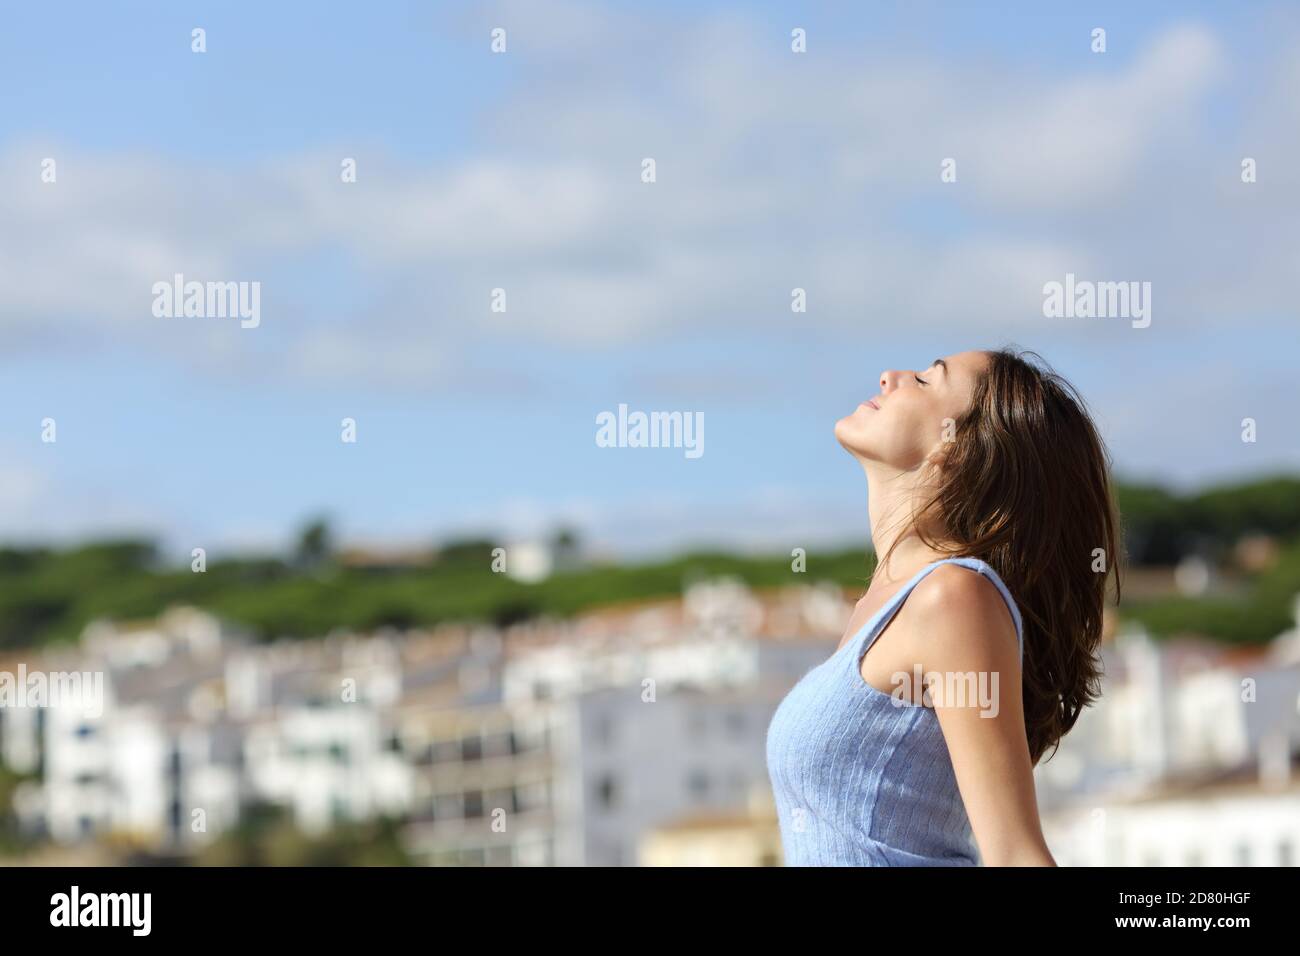 Profila of a relaxed tourist breathing fresh air in a rural town on holiday Stock Photo